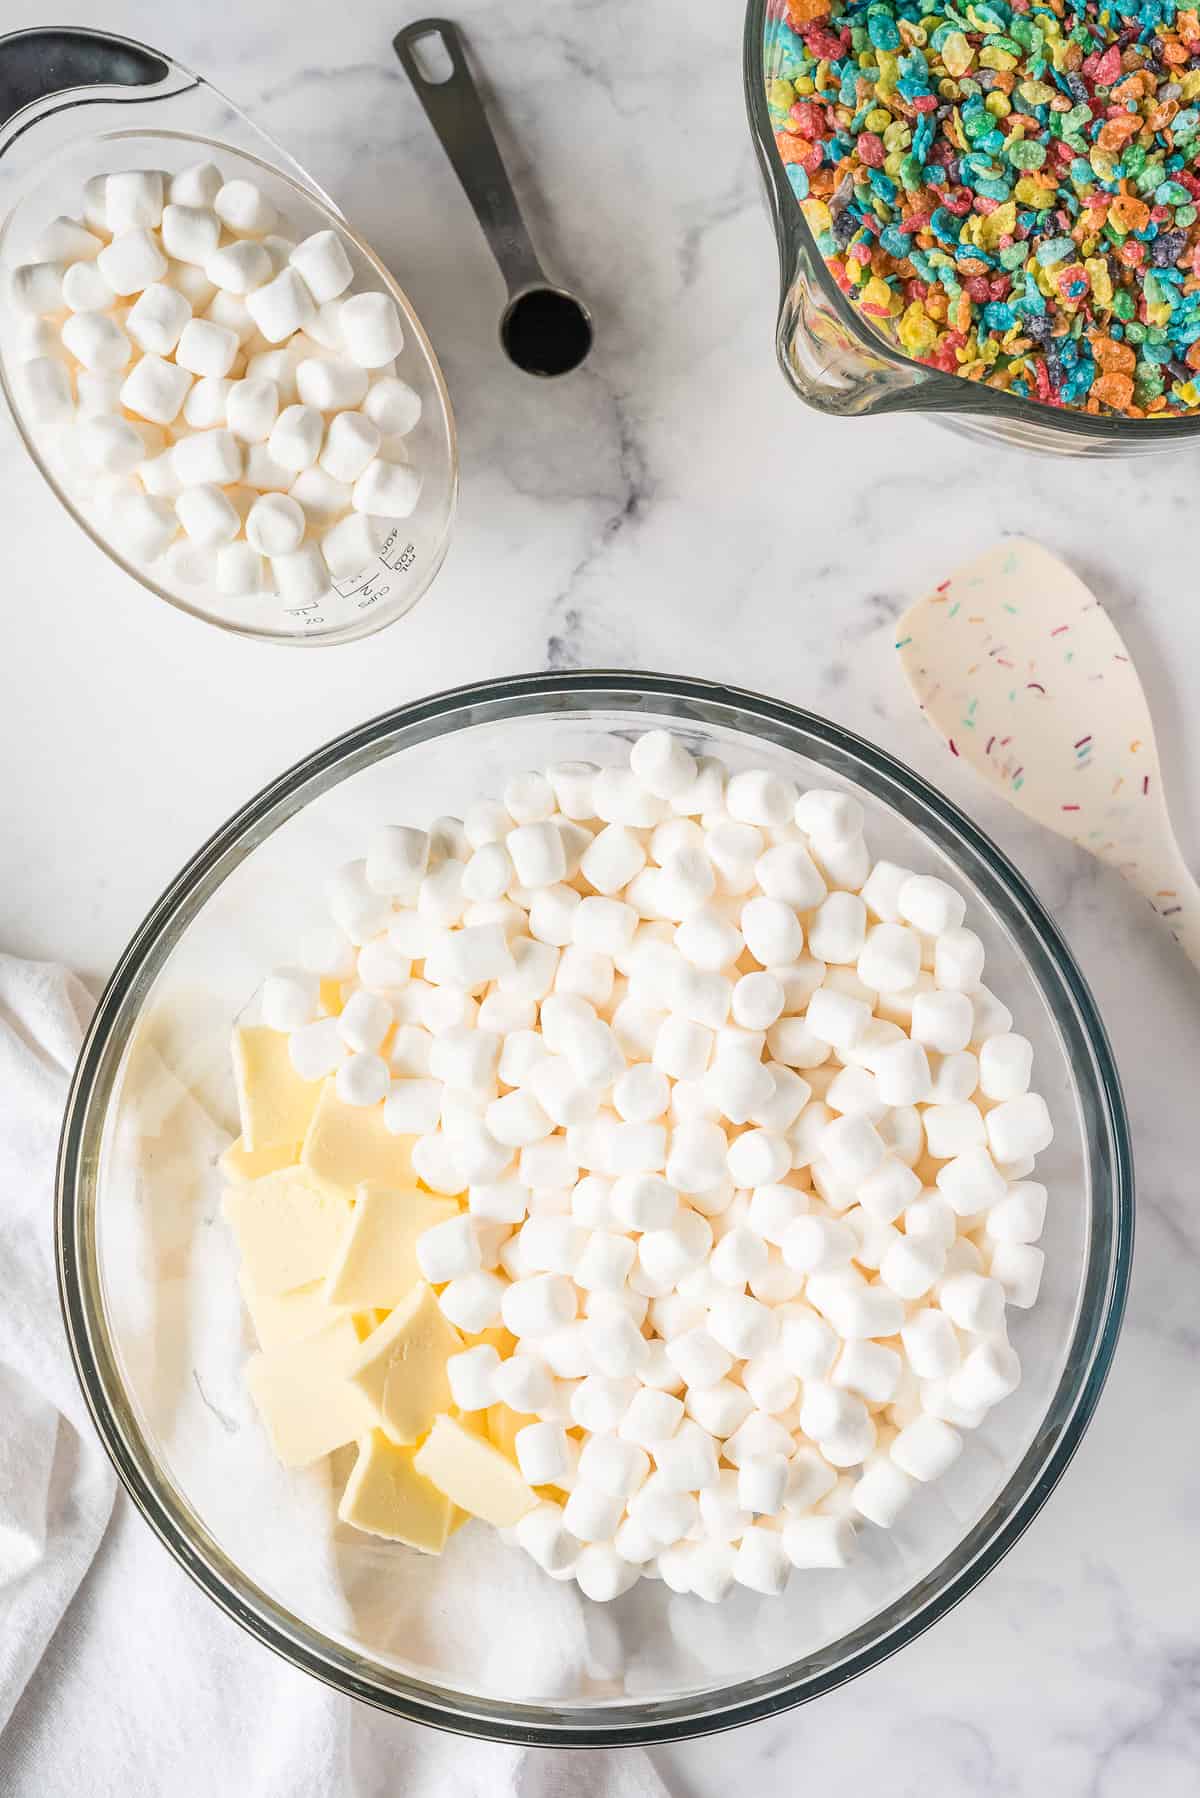 Slice the Butter in to smaller pieces & add marshmallows, then microwave.